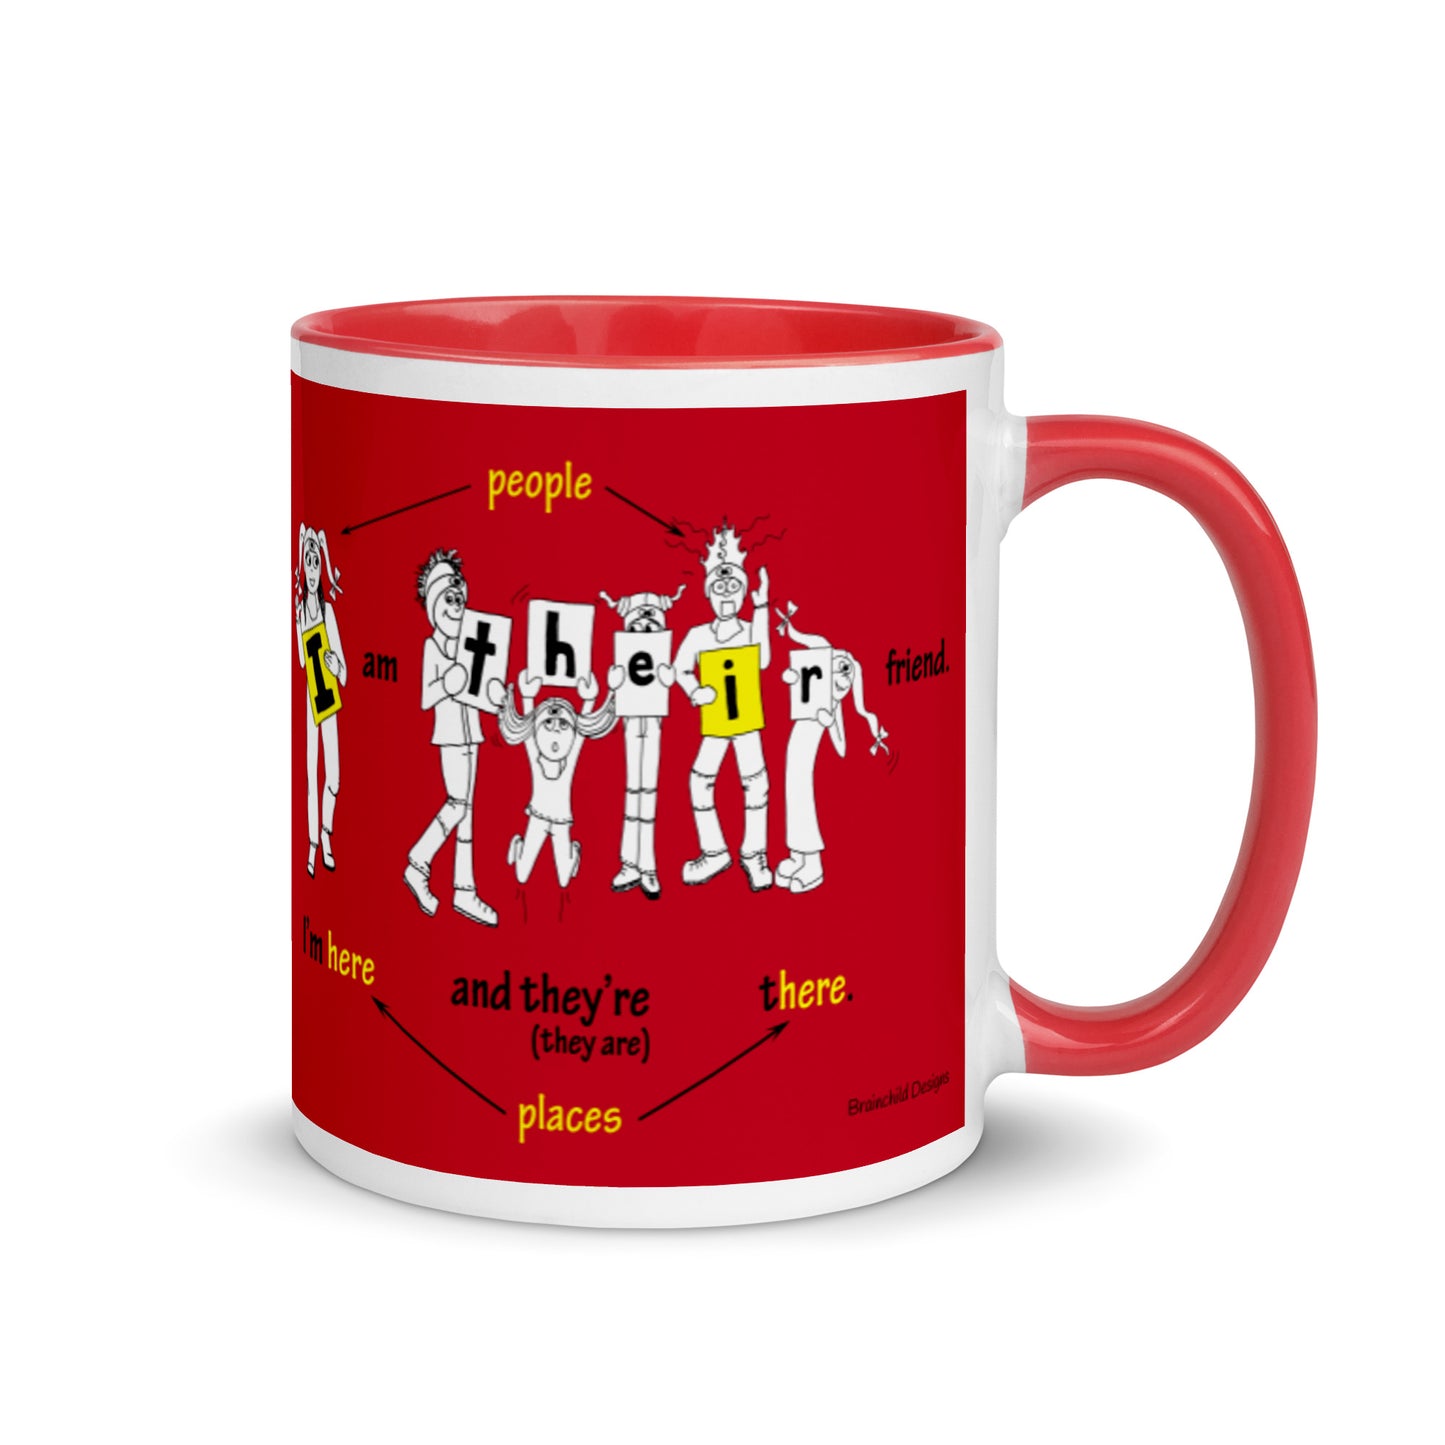 Their there and they're mug - Brainchild Designs